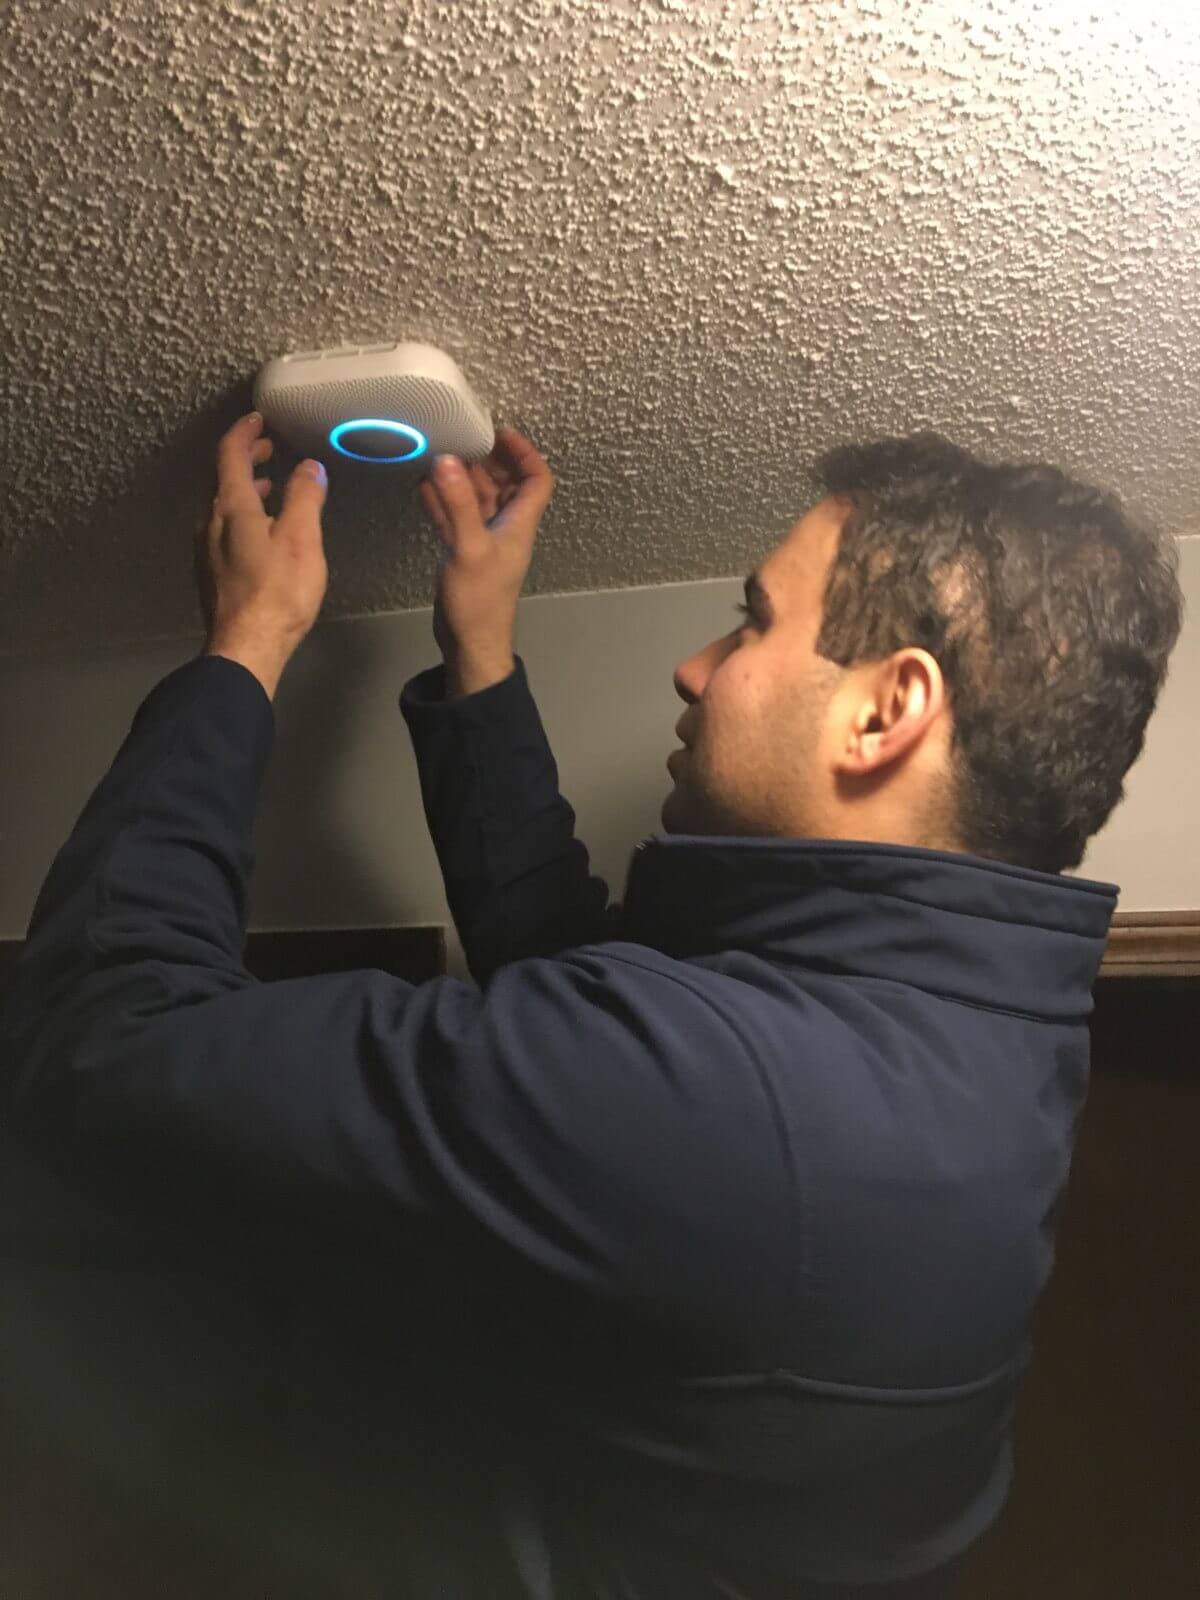 What Kansas City Homeowners need to know about fire & carbon monoxide safety in the home.